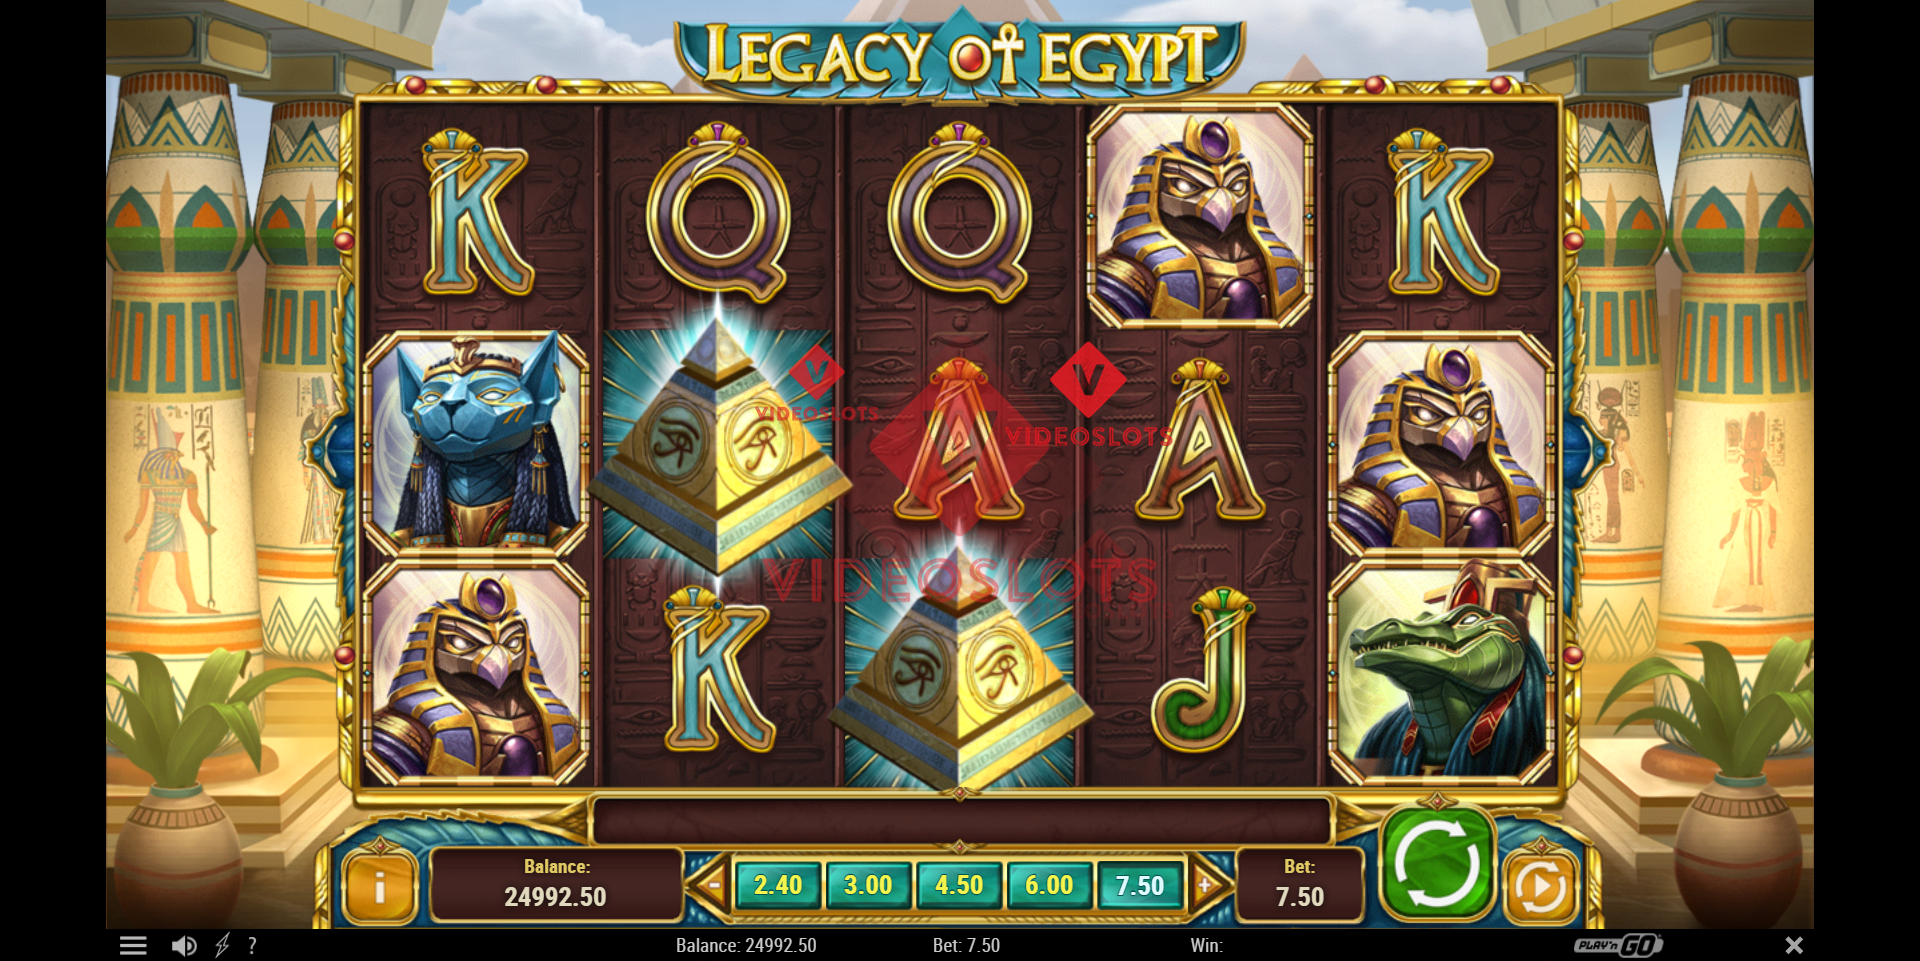 Base Game for Legacy of Egypt slot from Play'n Go